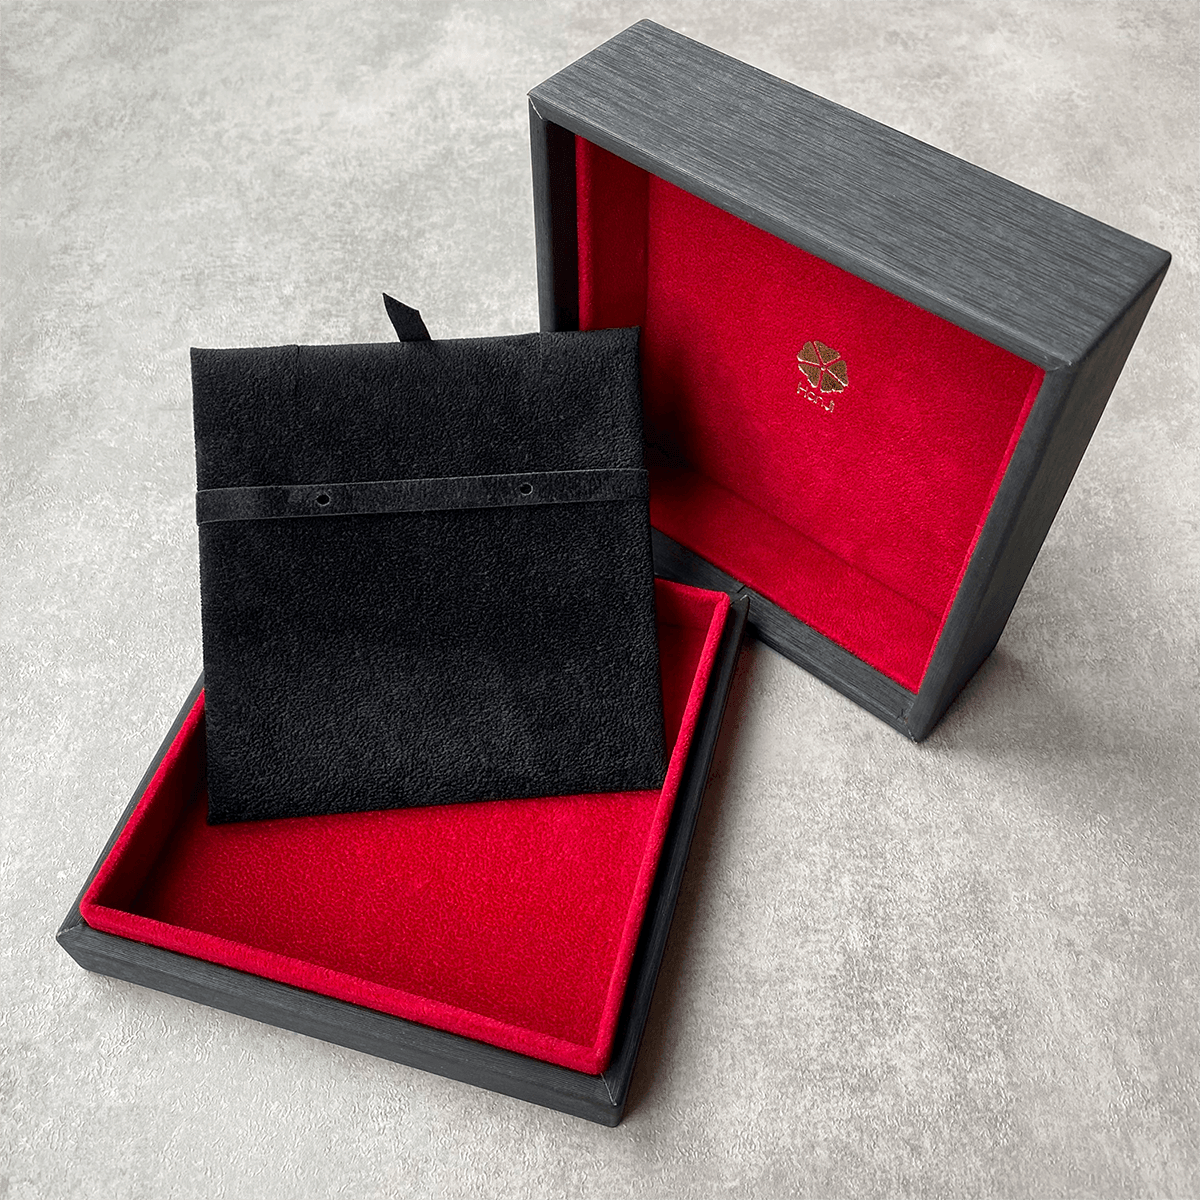 Luxury black and red jewelry box necklace box earring box